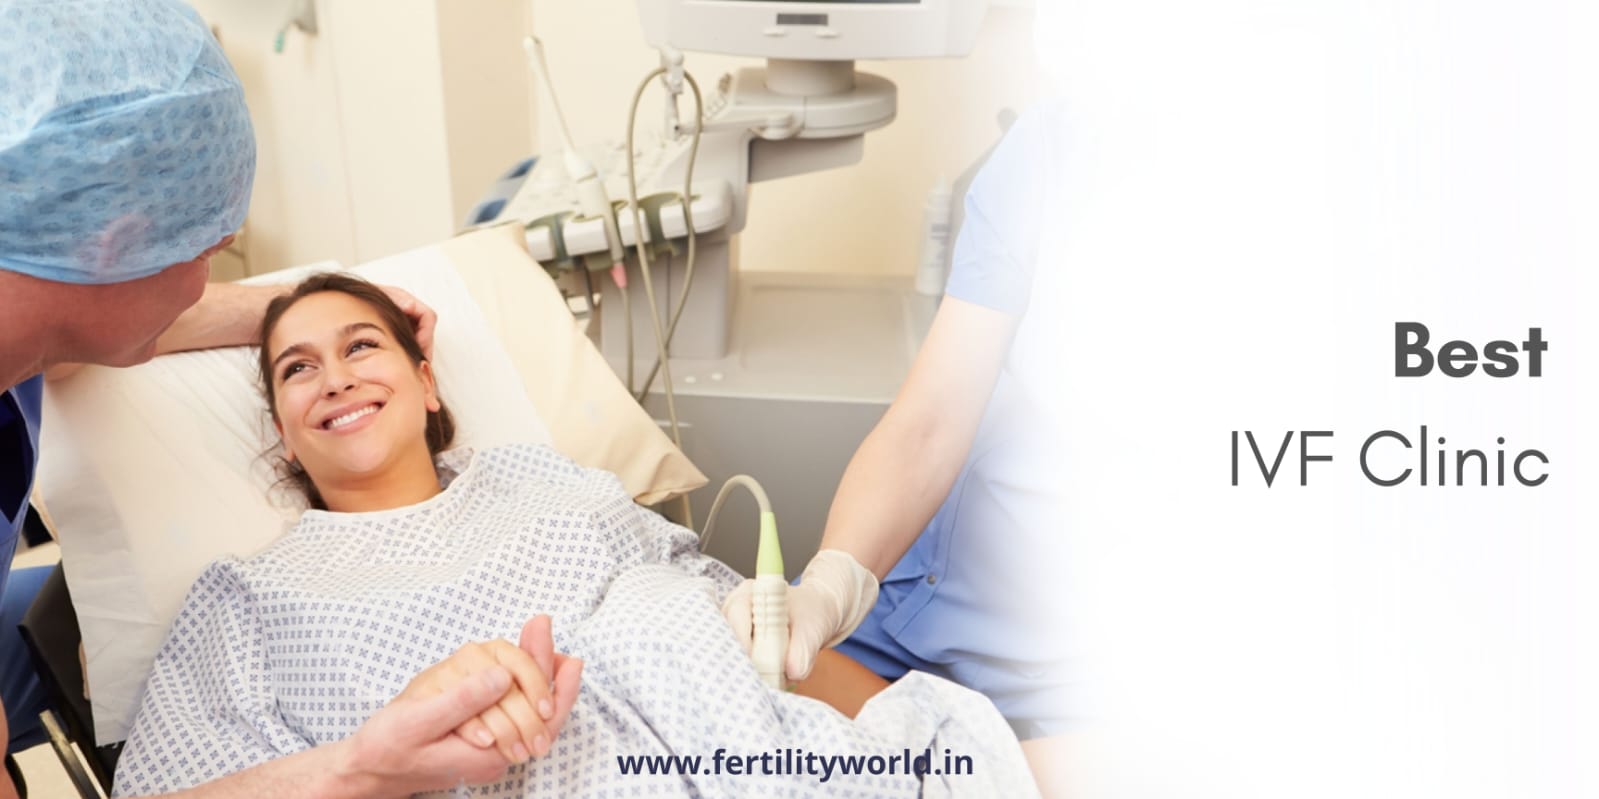 Why fertilityworld is the best IVF Center in Bangalore?